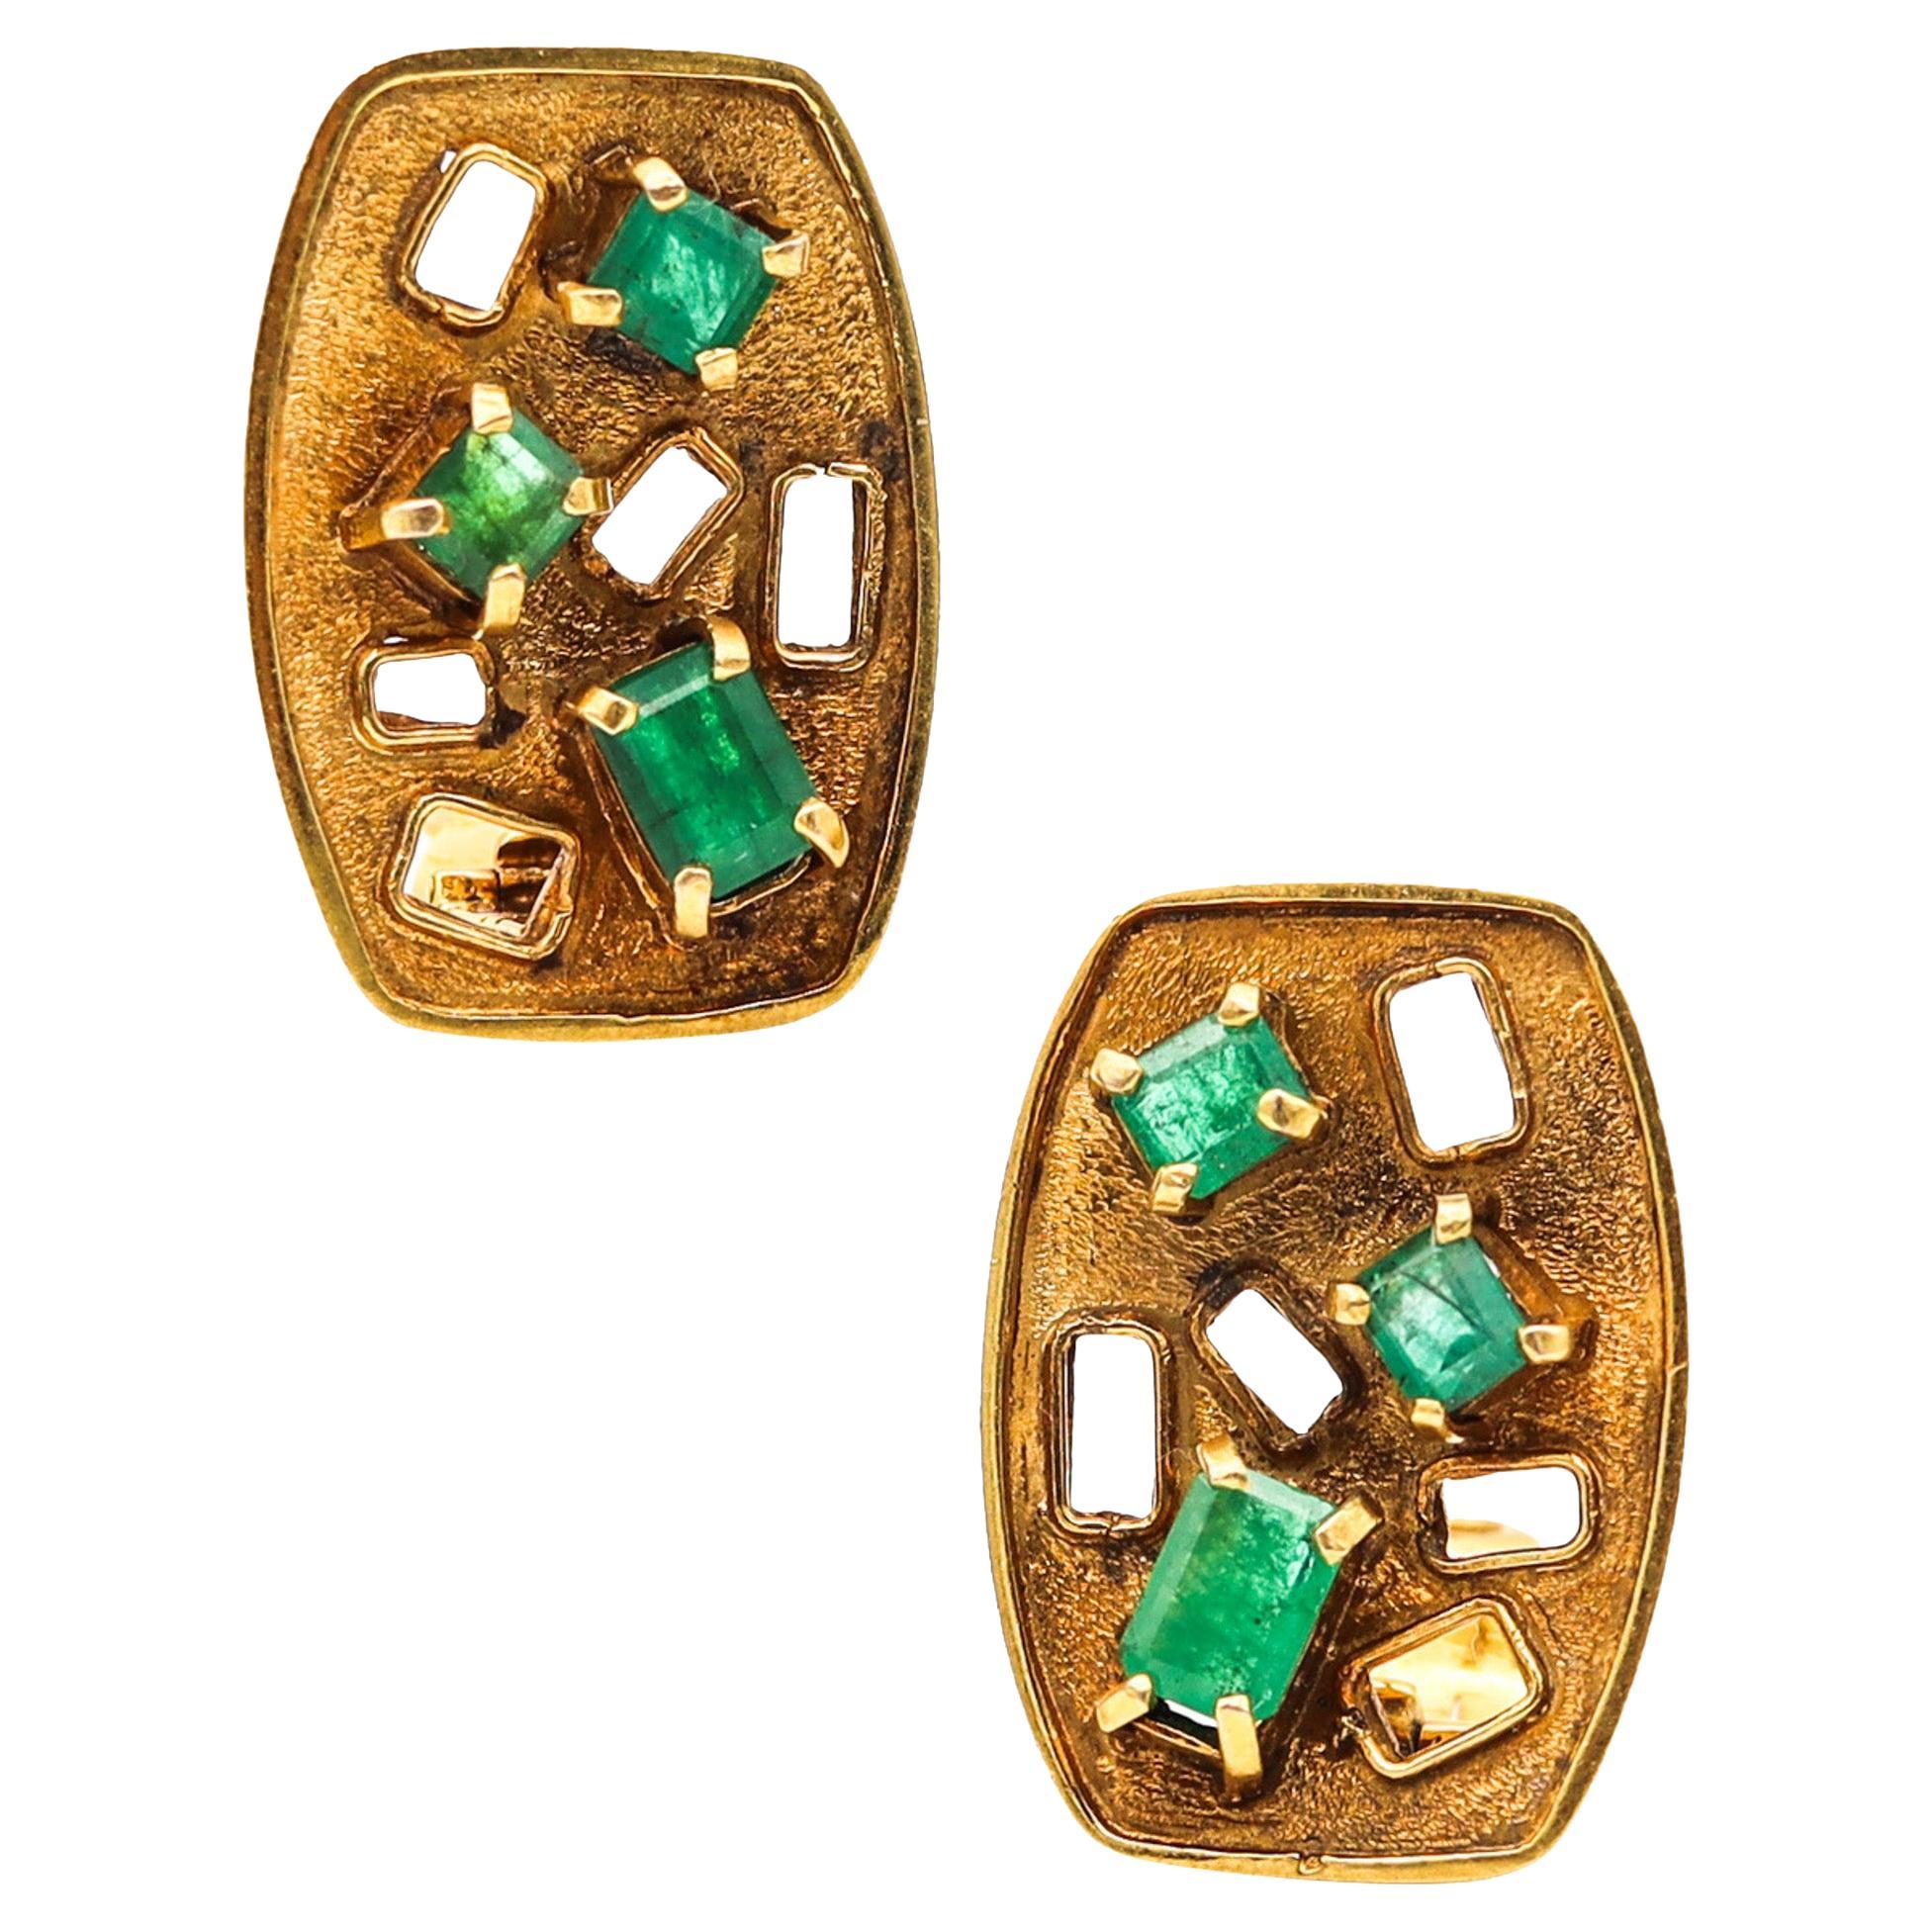 Bruno Guidi 1970 Retro Modernist Earrings In 18Kt Gold With 4.45 Ctw In Emeralds For Sale